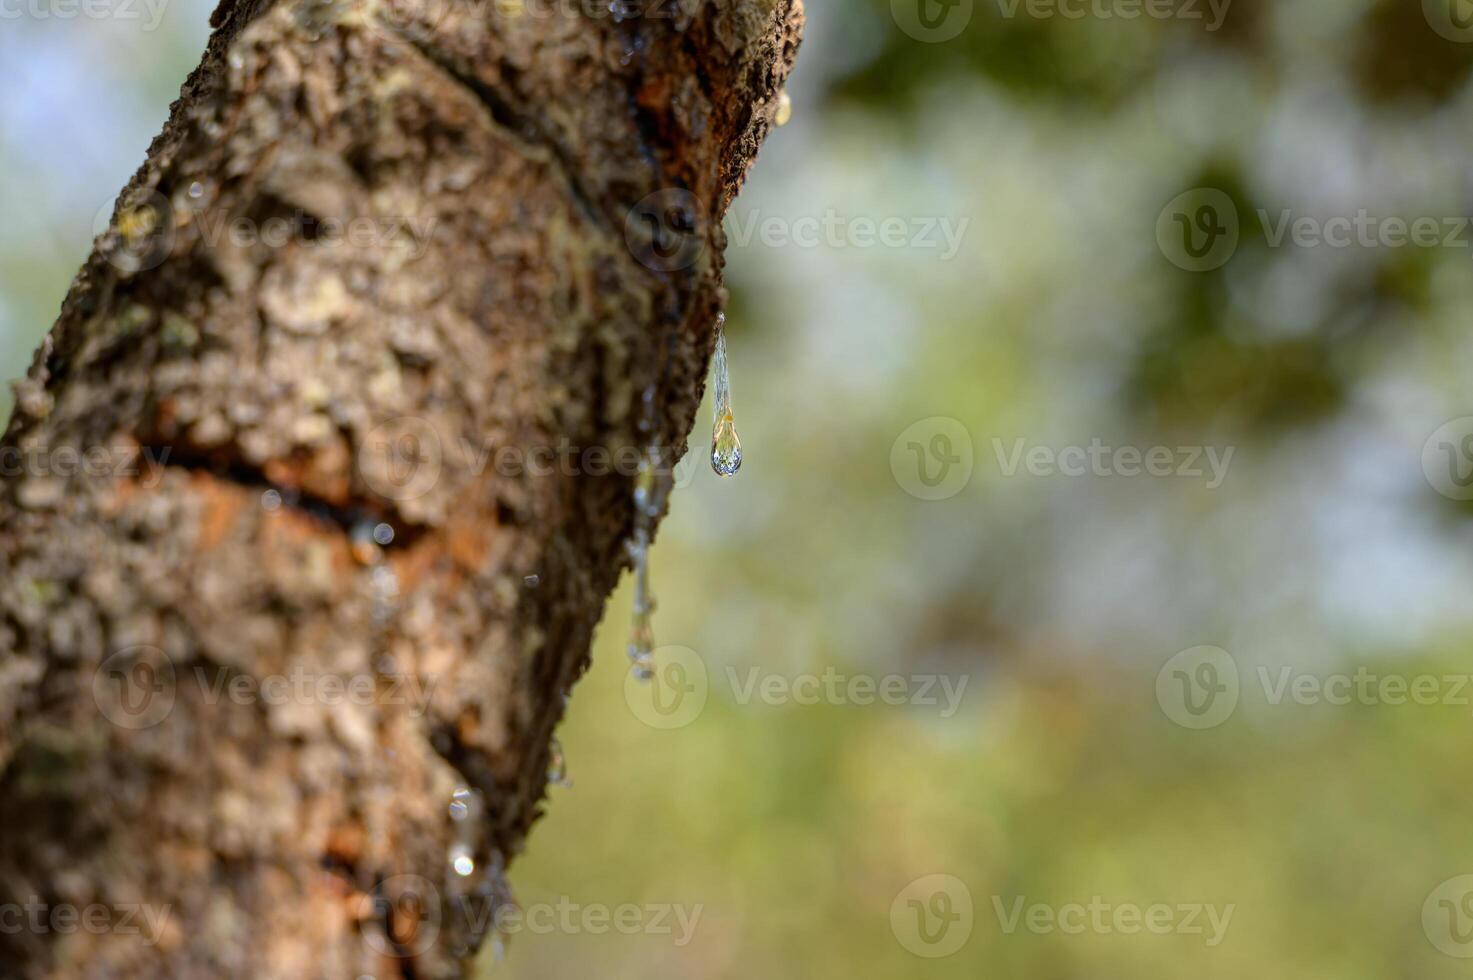 Selective focus on big mastic drops oozes in tears out of the branch of a mastic tree. The resin mastic brightens and twinkles in the sunlight. Vertical pic. Beautiful bokeh background. Chios, Greece. photo